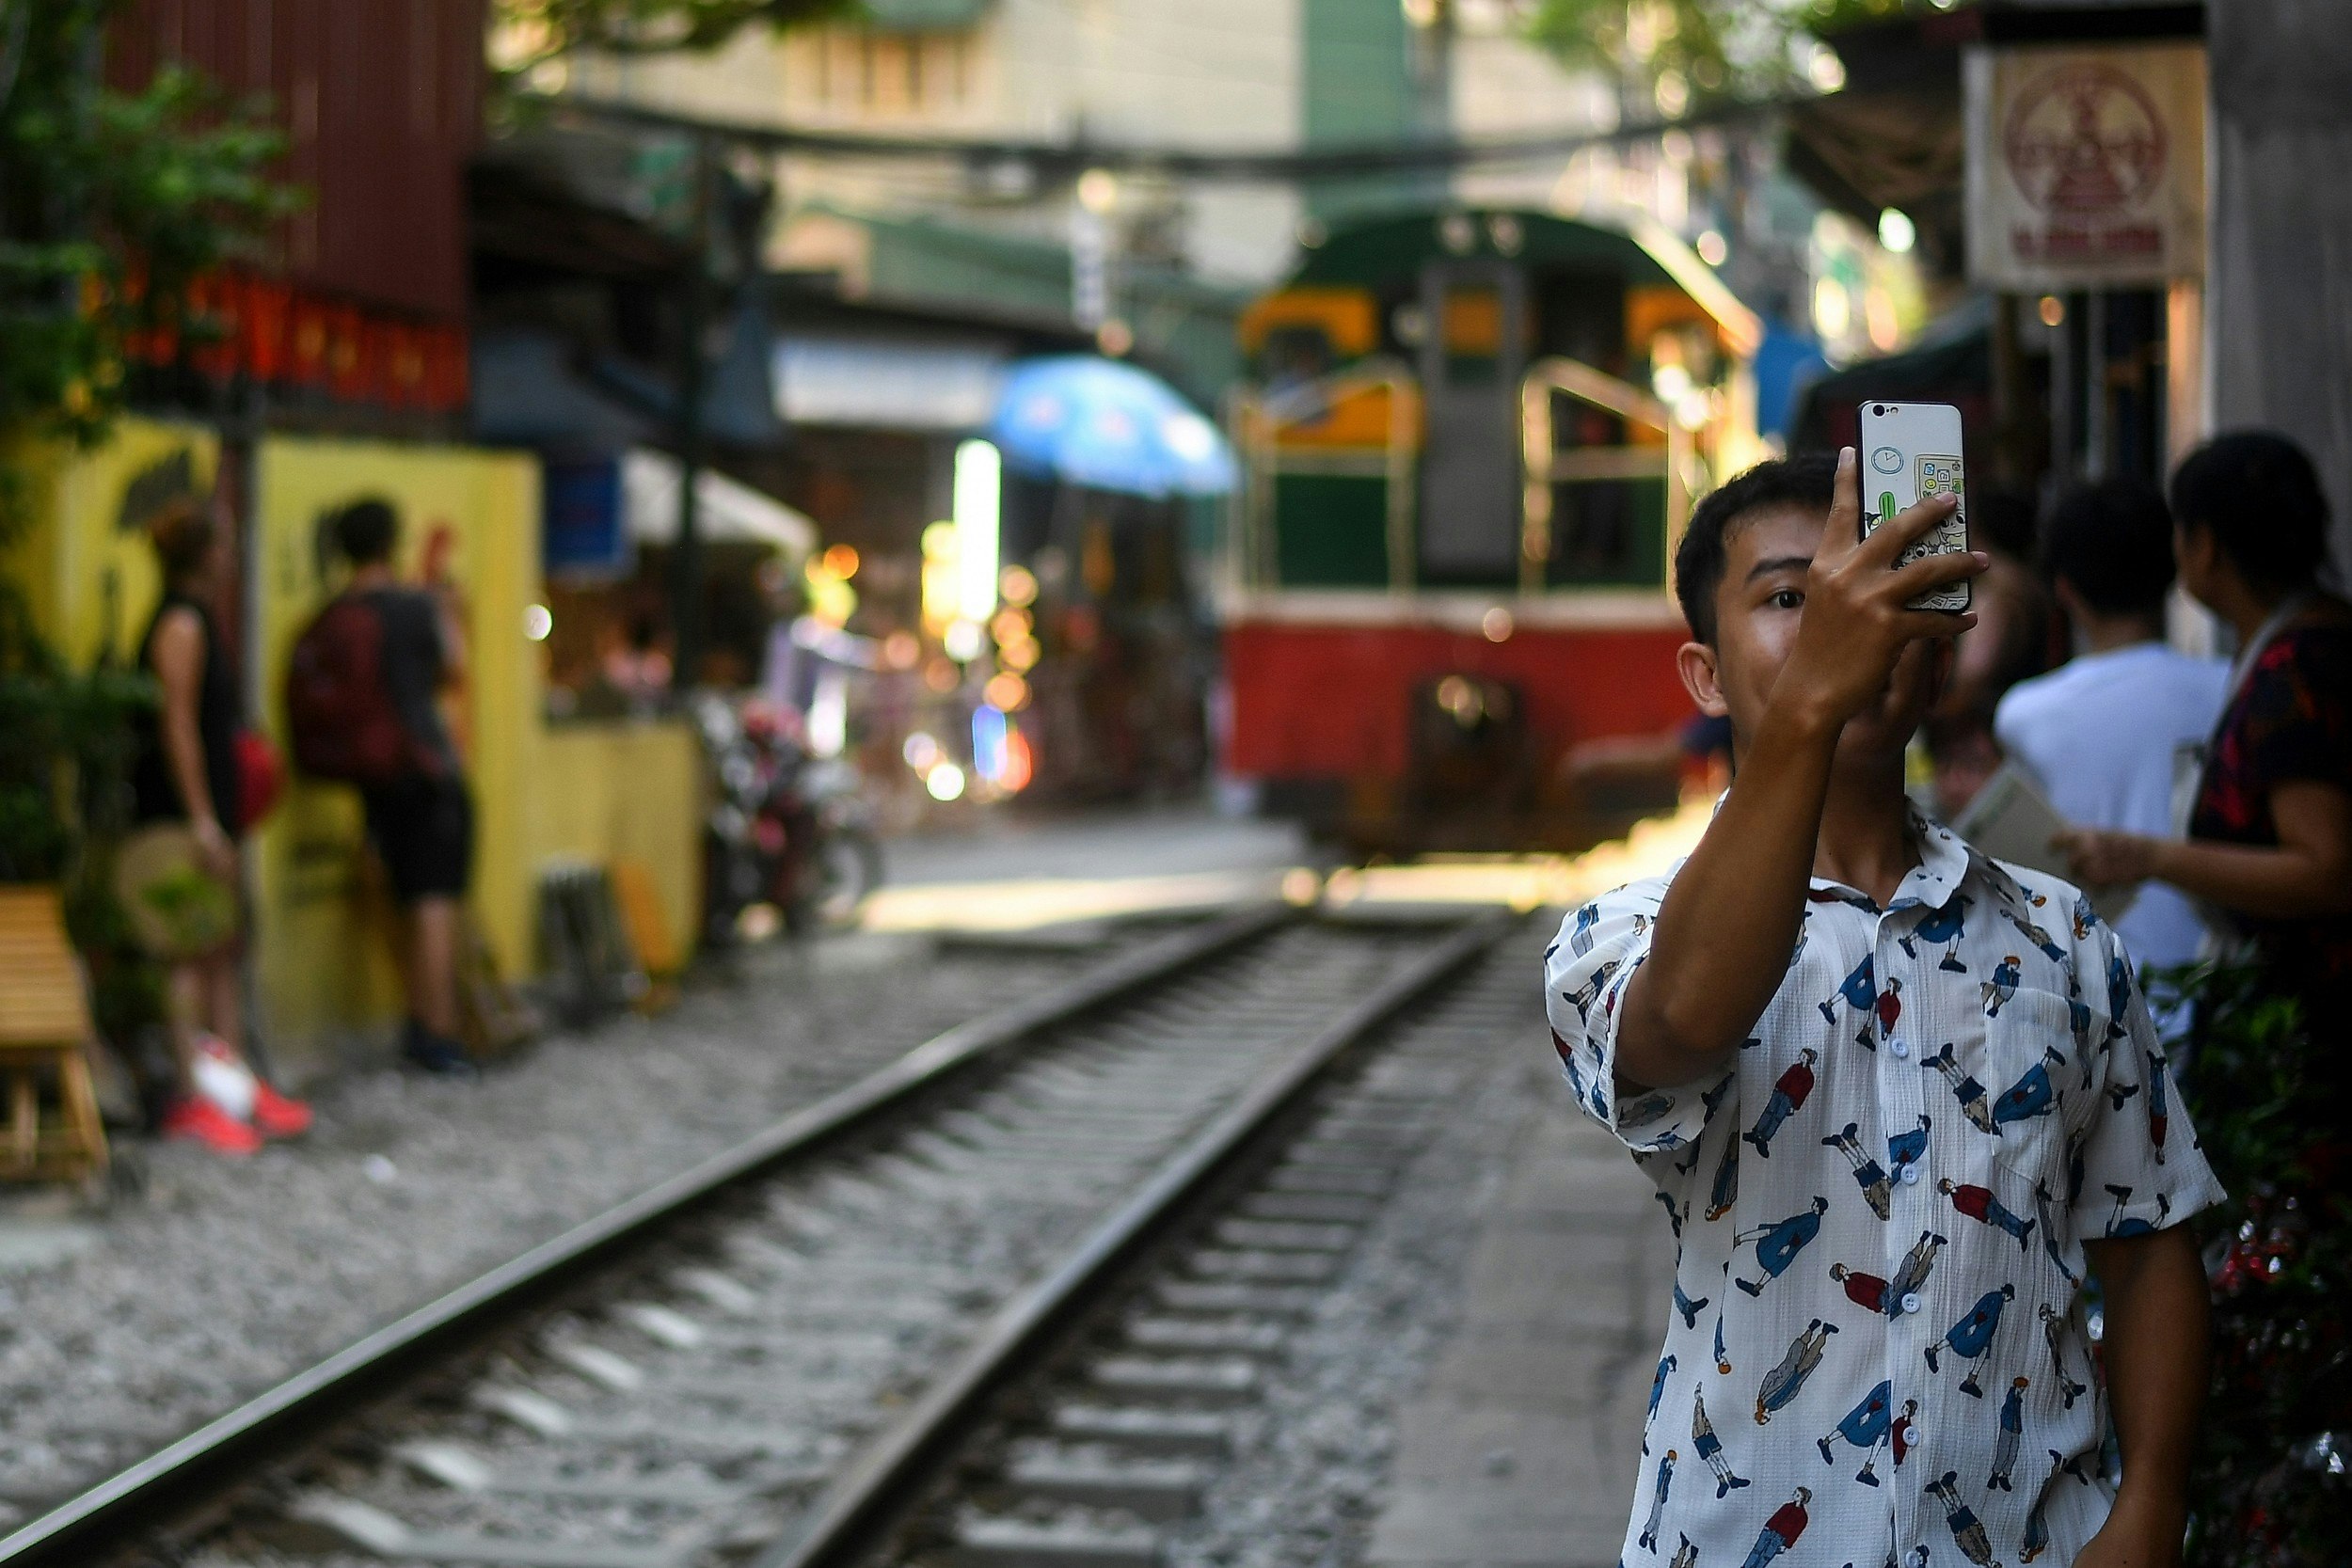 A man taking a selfie as the train approaches on the railway track in Hanoi's popular Train Street 